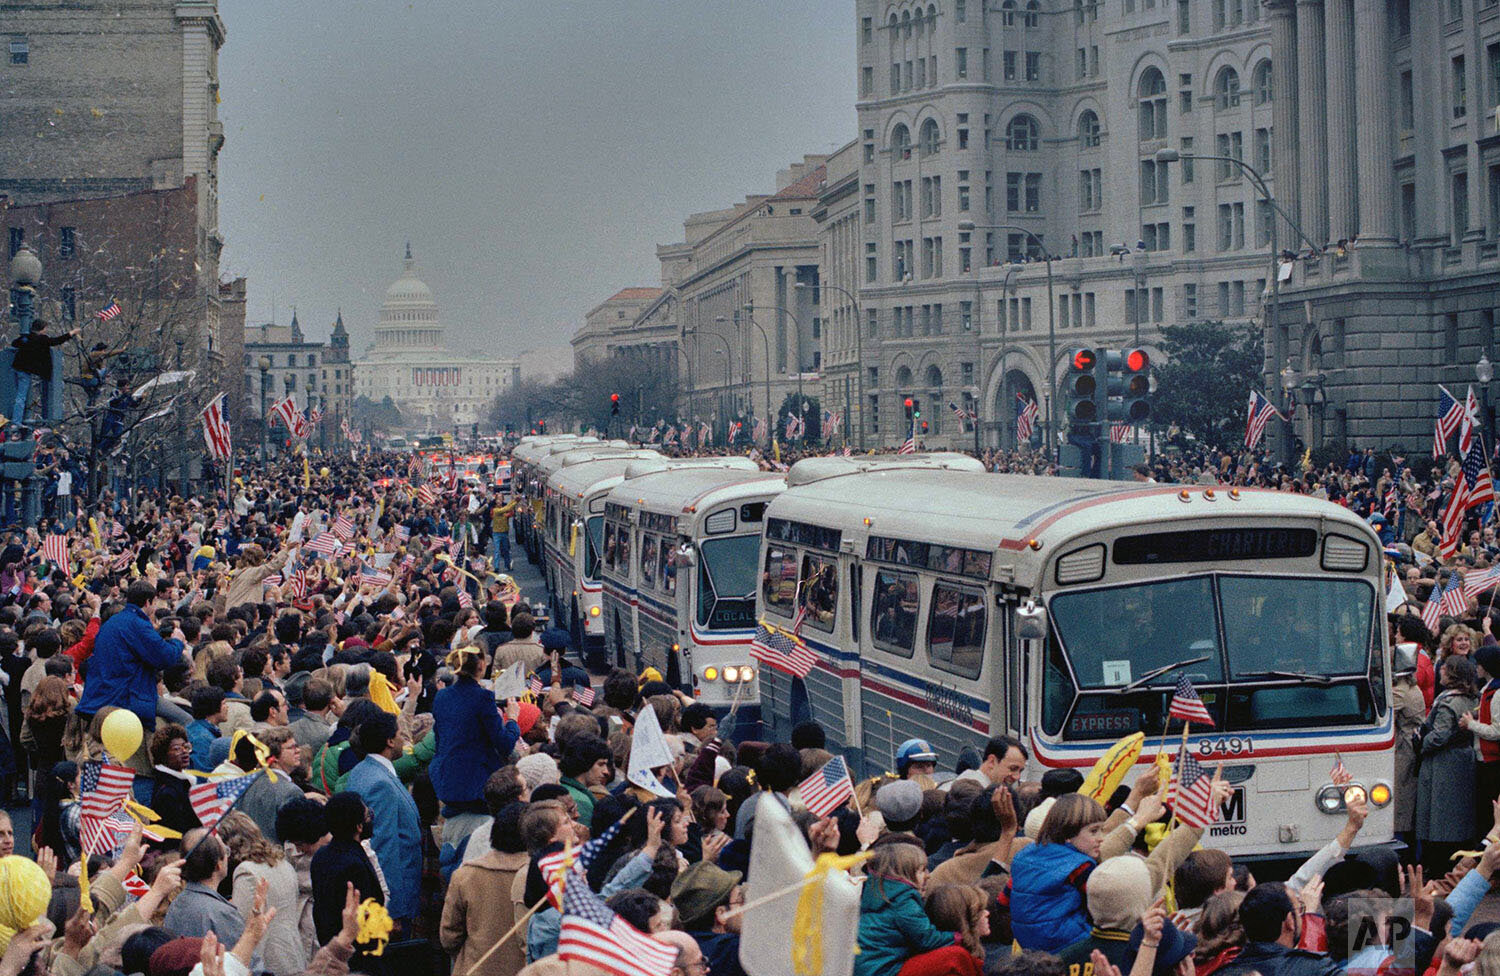  The caravan of buses carrying the former hostages and their relatives makes its way through the crowd on hand to greet them on Washington's Pennsylvania Avenue, Jan. 27, 1981.  The 52 Americans were held hostage in Iran for 444 days after their capt